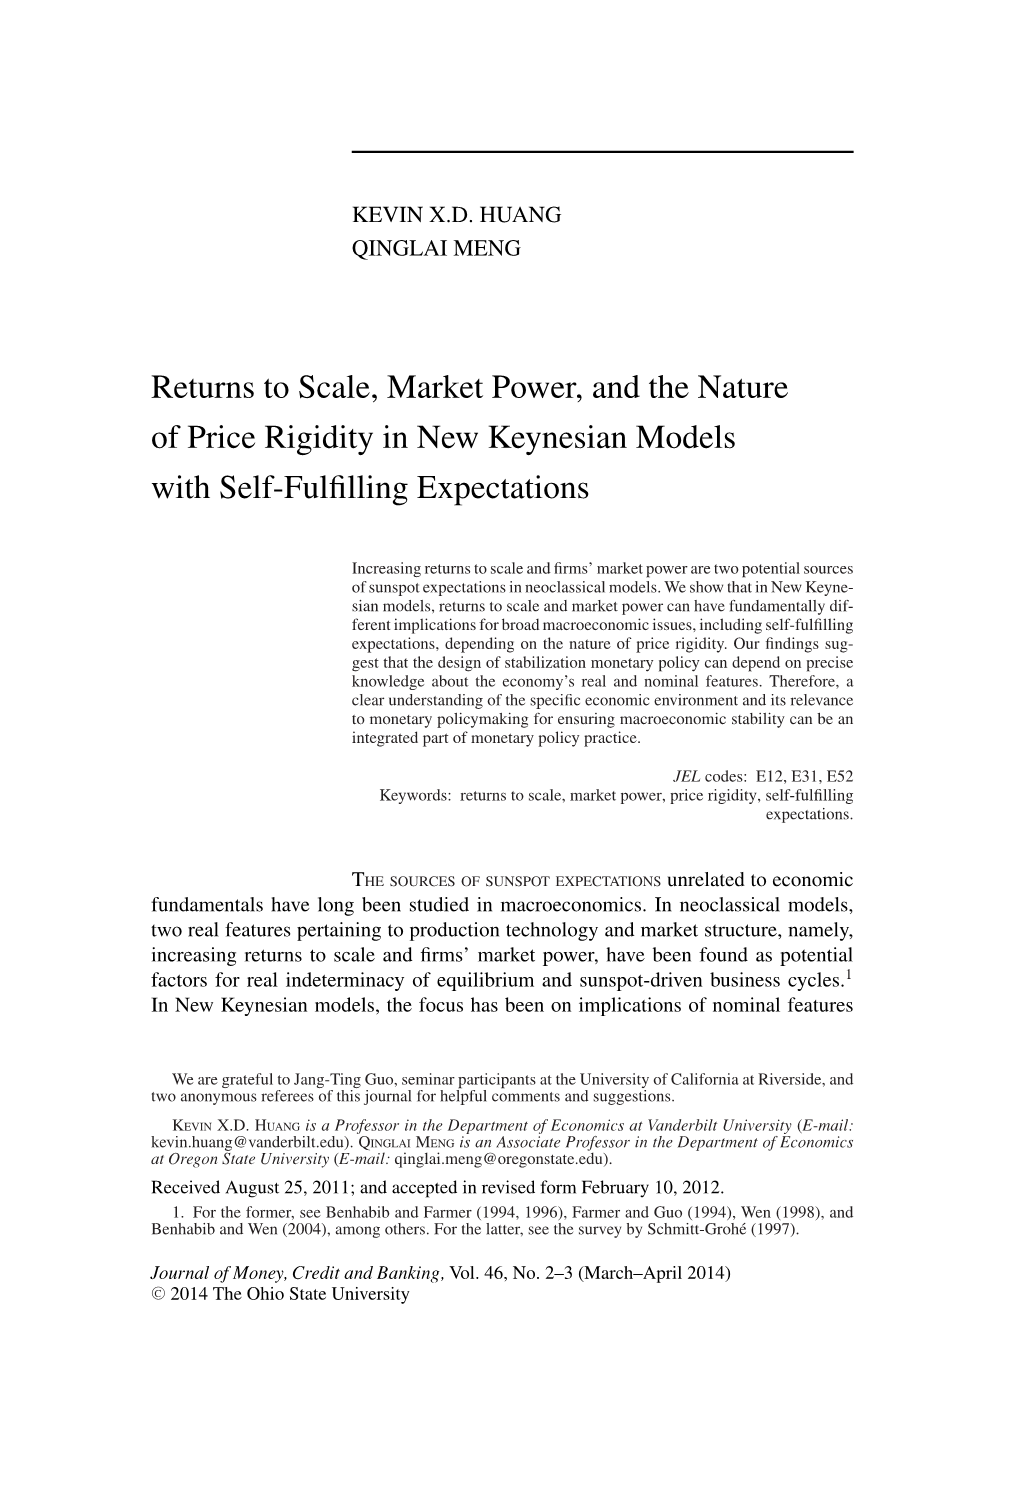 Returns to Scale, Market Power, and the Nature of Price Rigidity in New Keynesian Models with Self-Fulﬁlling Expectations